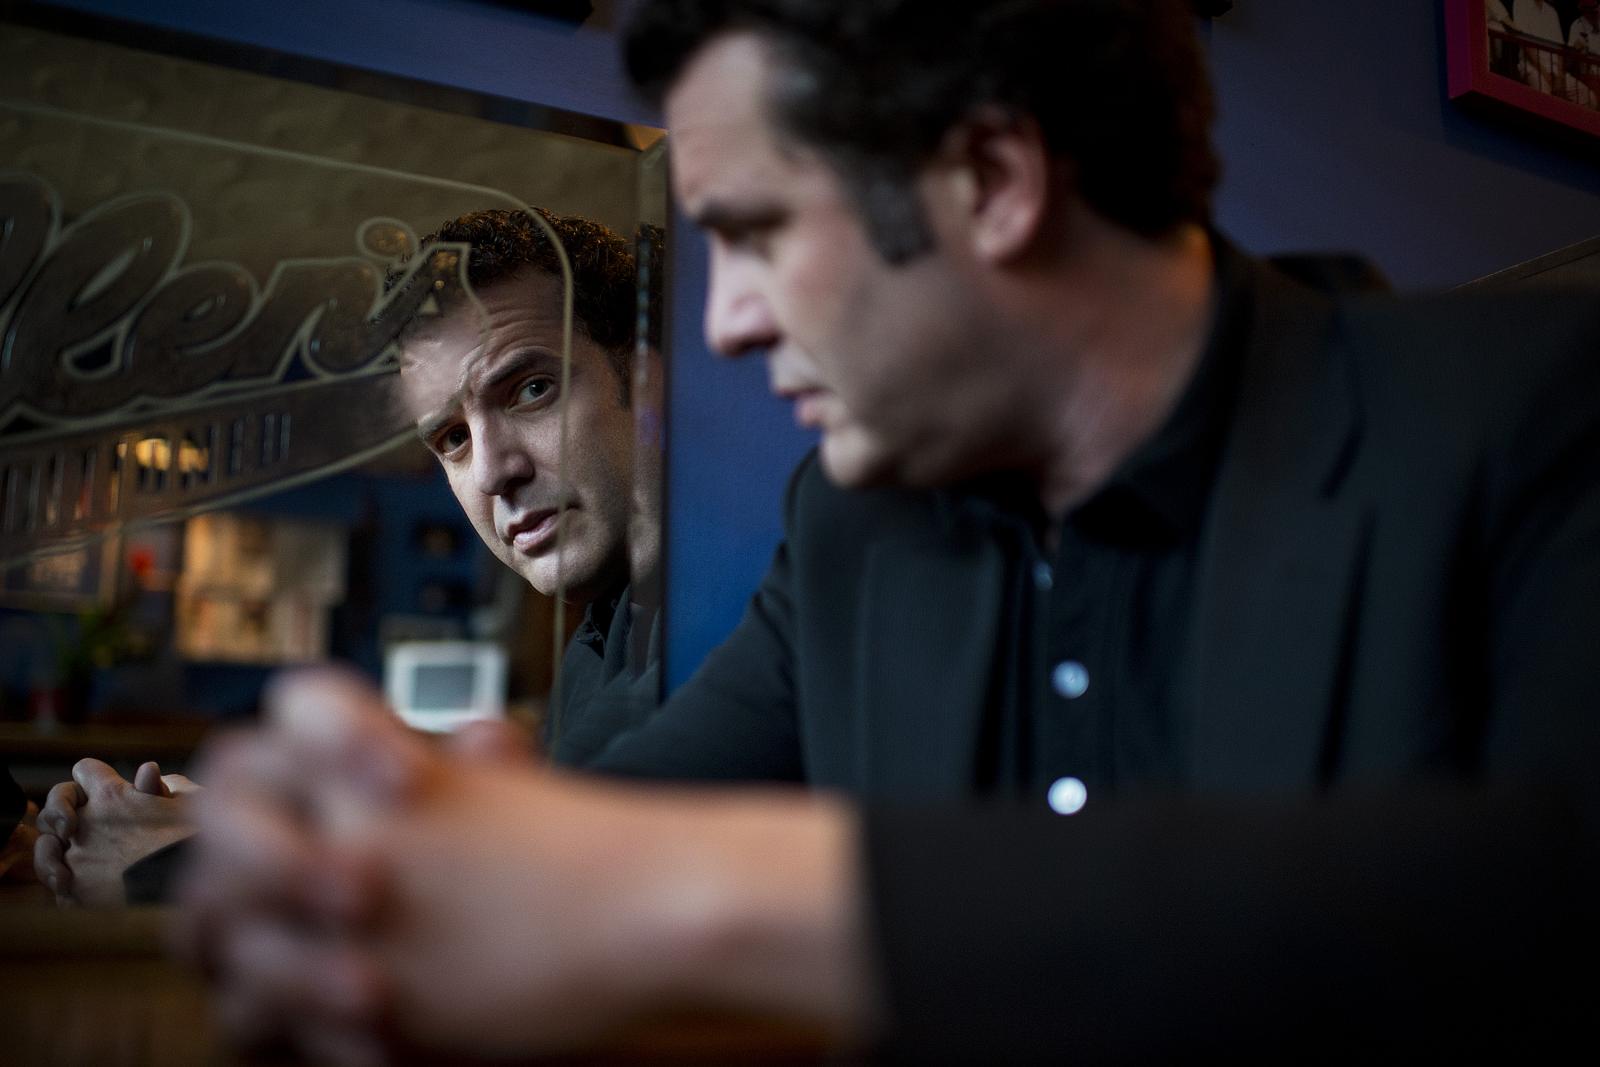 Image from Portraits - Rick Mercer poses for a photograph at the Allen Pub on...